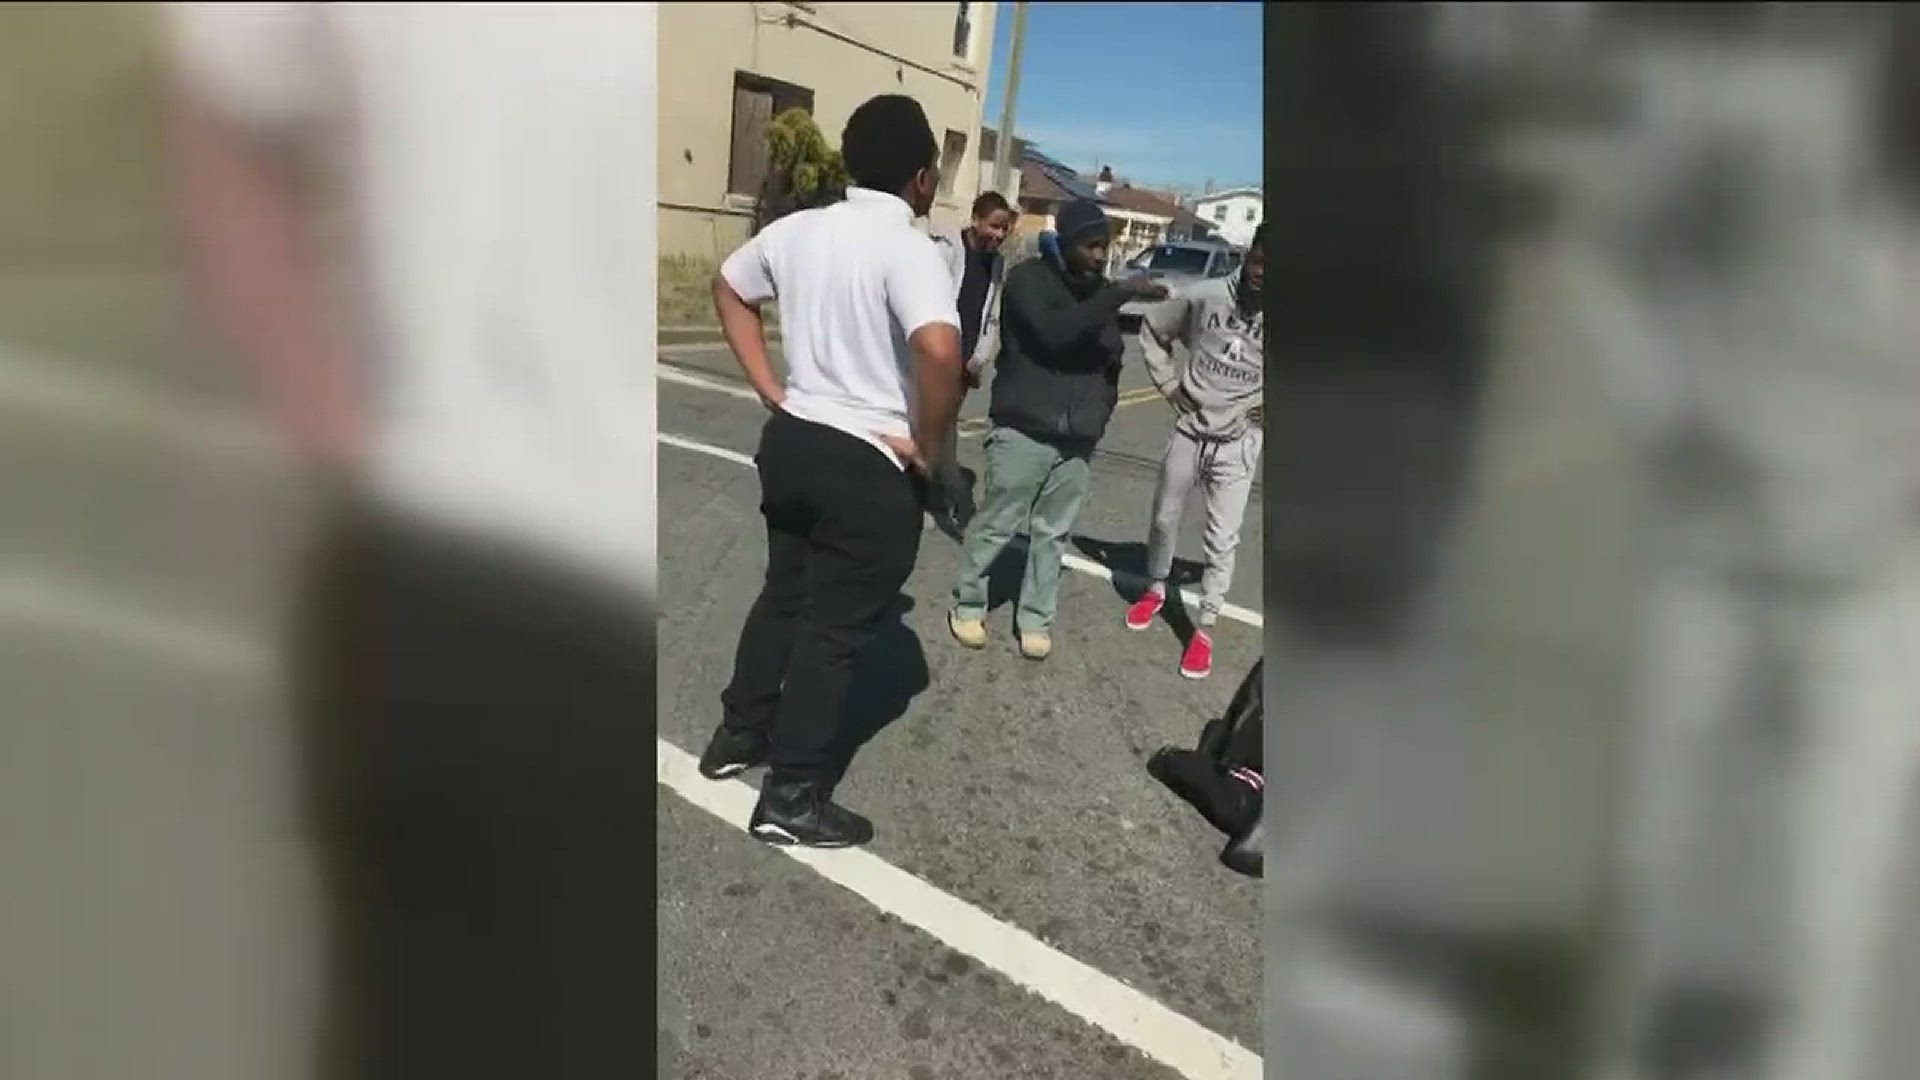 This isn't your standard street fight recorded on cell phone and shared widely on social media (March 21, 2017)